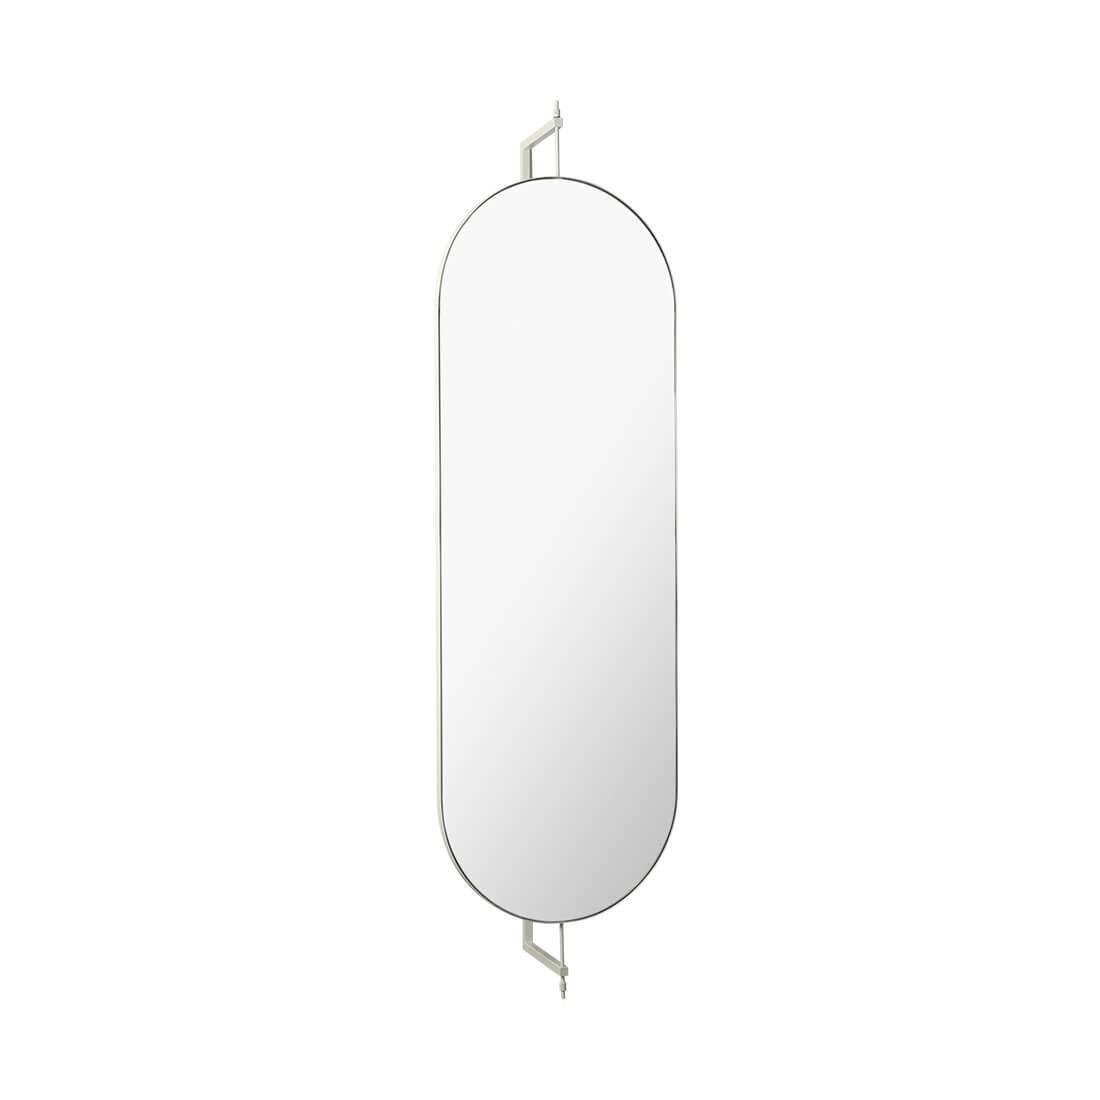 Full-size rotating mirror by Kristina Dam Studio
Materials: Beige powder-coated steel. Mirror.
Also available in other colors.
Dimensions: 14 x 55 x H 185cm.

The Modernist furniture collection takes notions of modern design and yet the